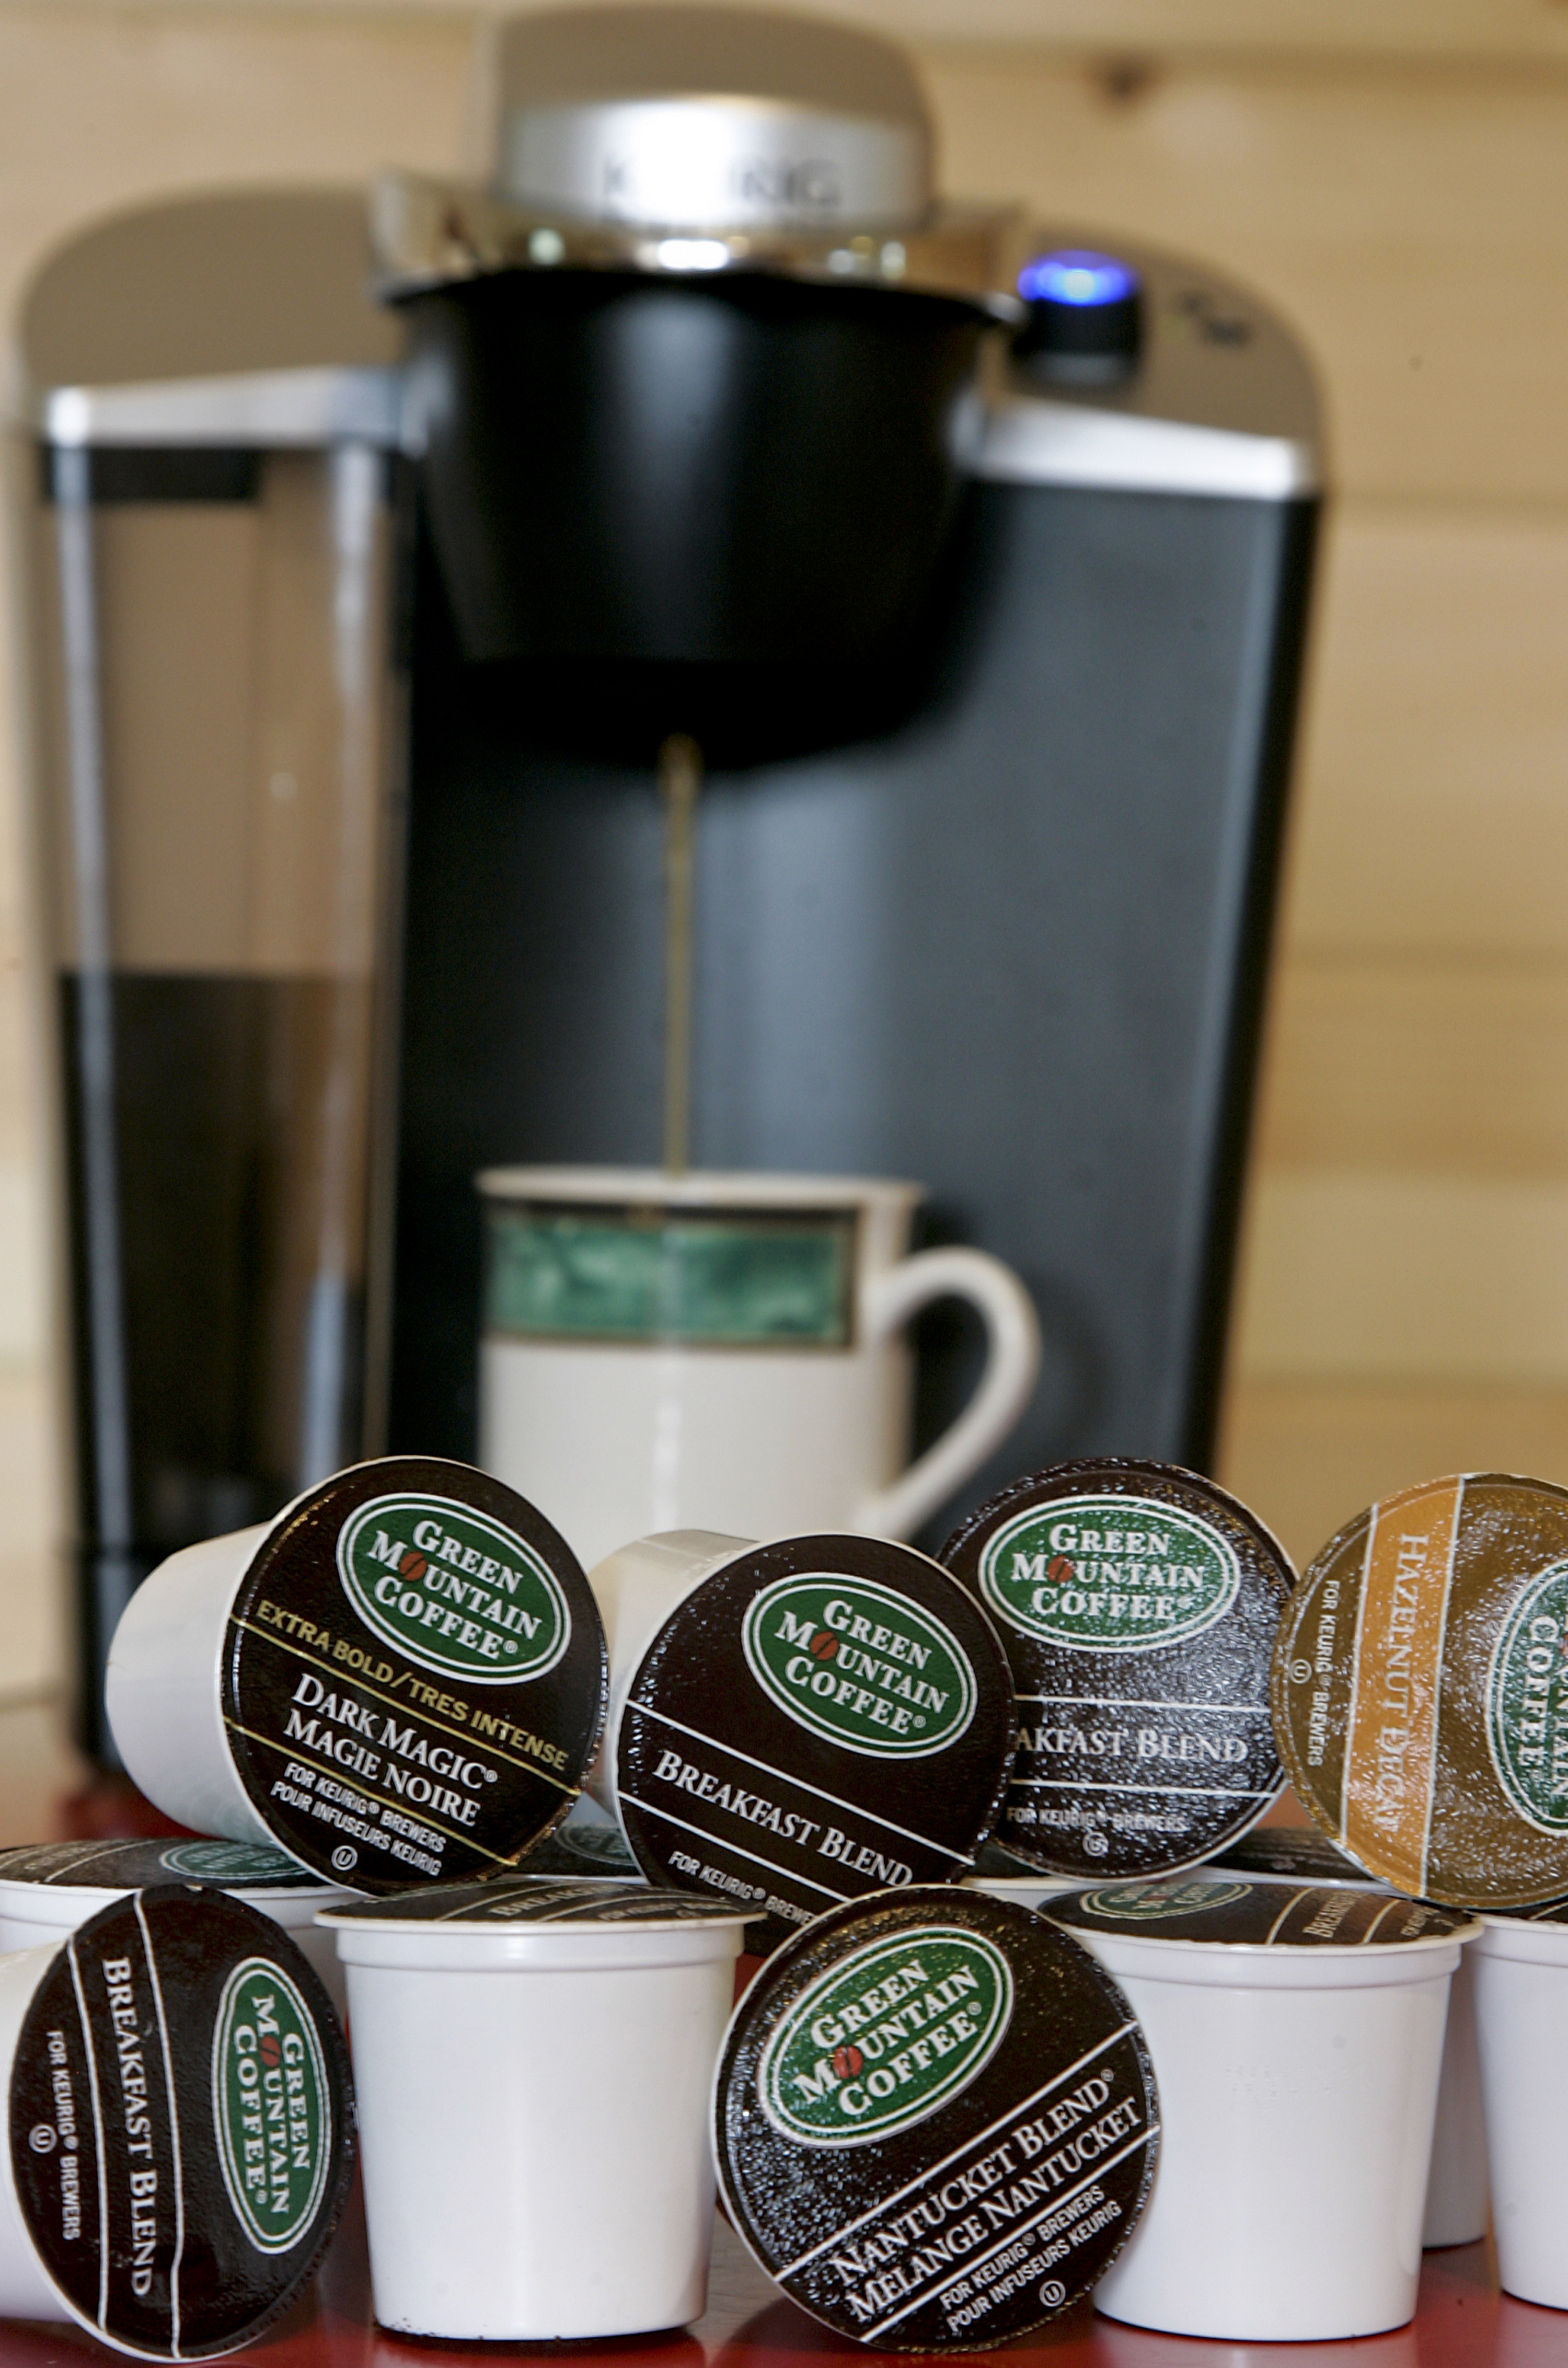 A coffee maker made by Keurig, a unit of Green Mountain Coffee Roasters Inc. K-Cups are arranged for a photo in Waterbury, Vt, on July 19, 2010. (Bloomberg via Getty Images)